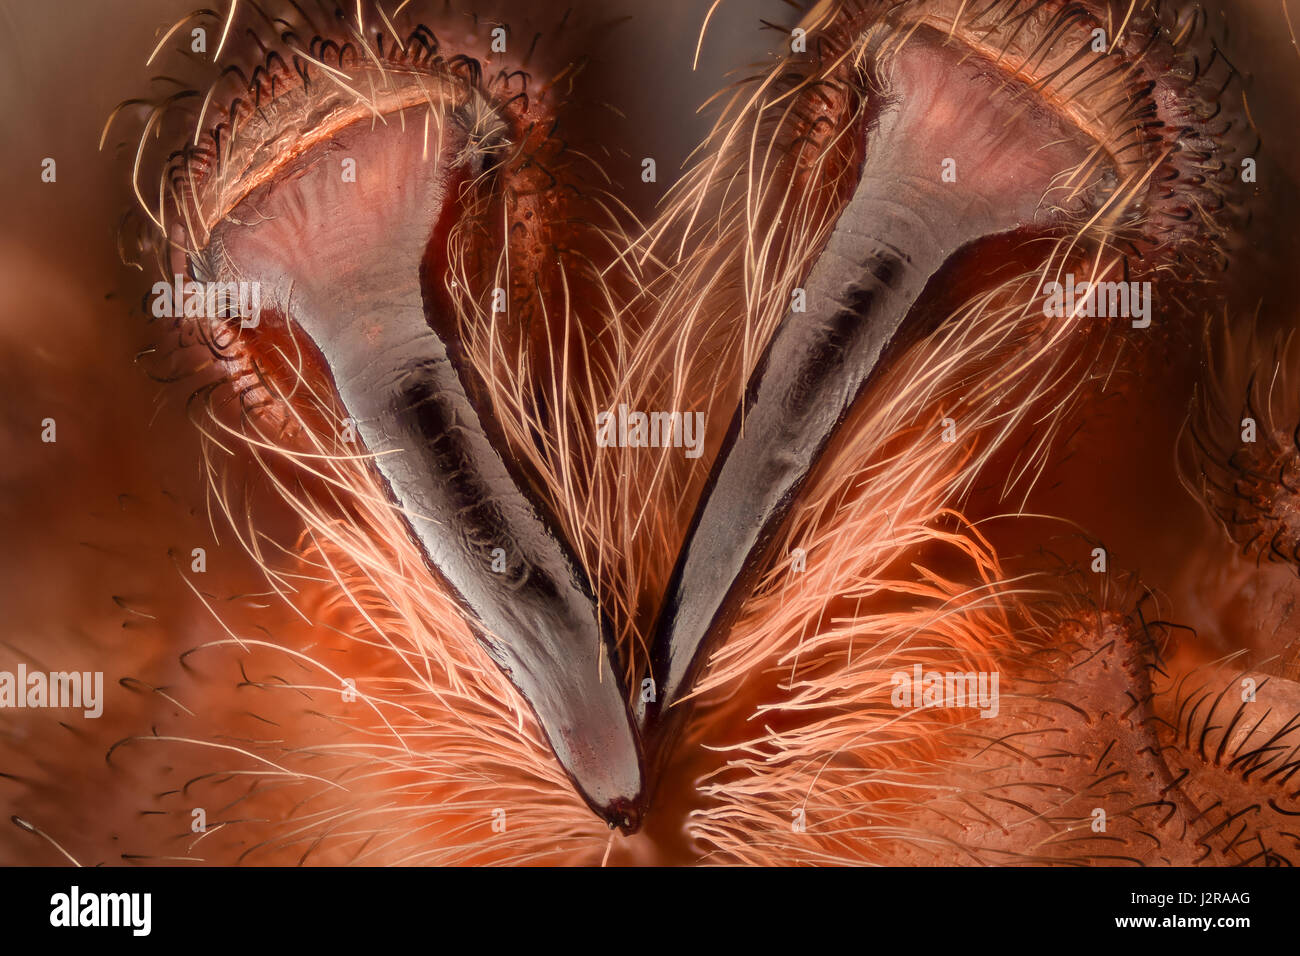 Extreme magnification - Mexican redknee tarantula fangs Stock Photo